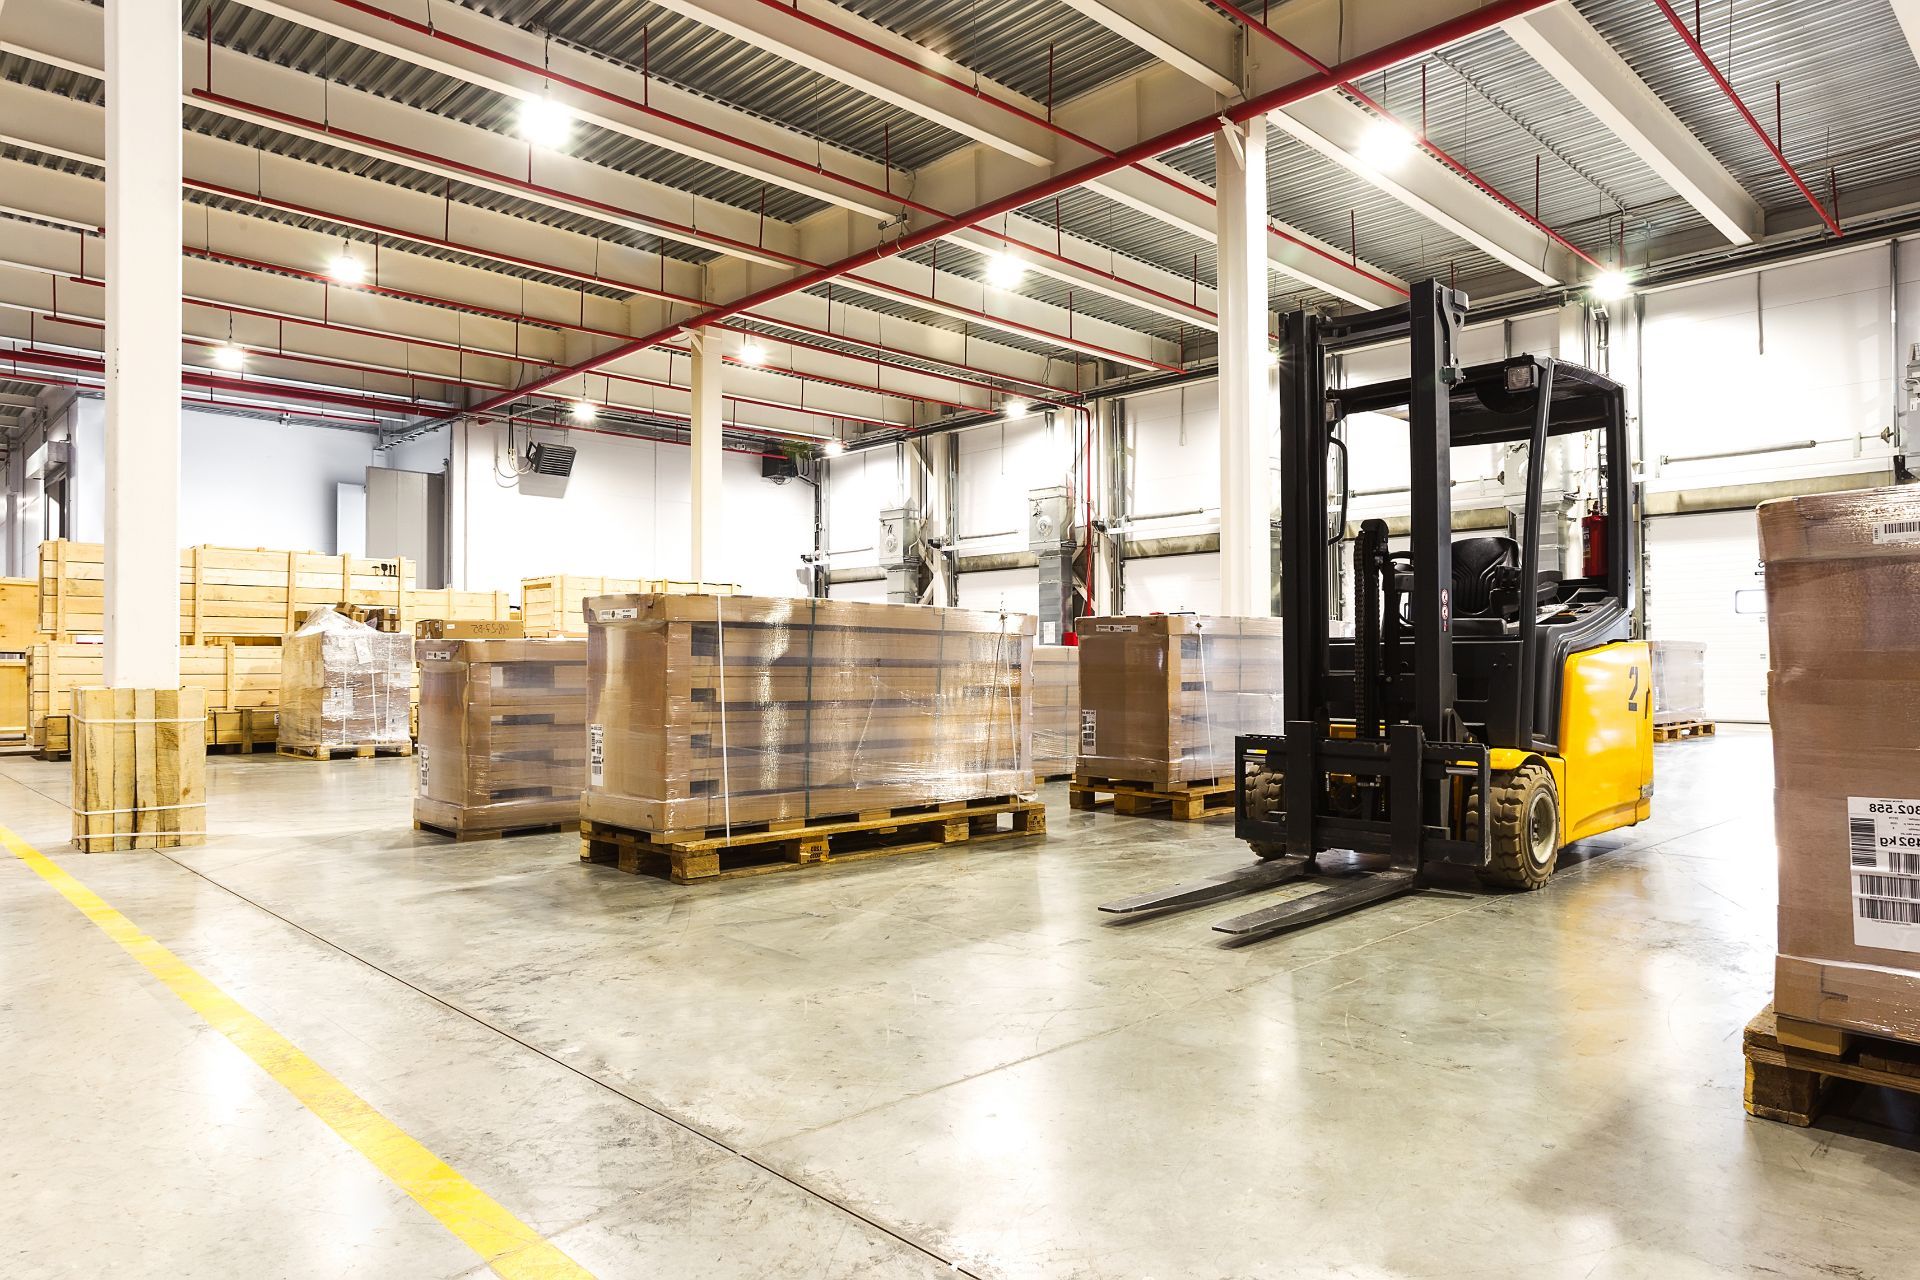 Warehouse with pallets and fork lift